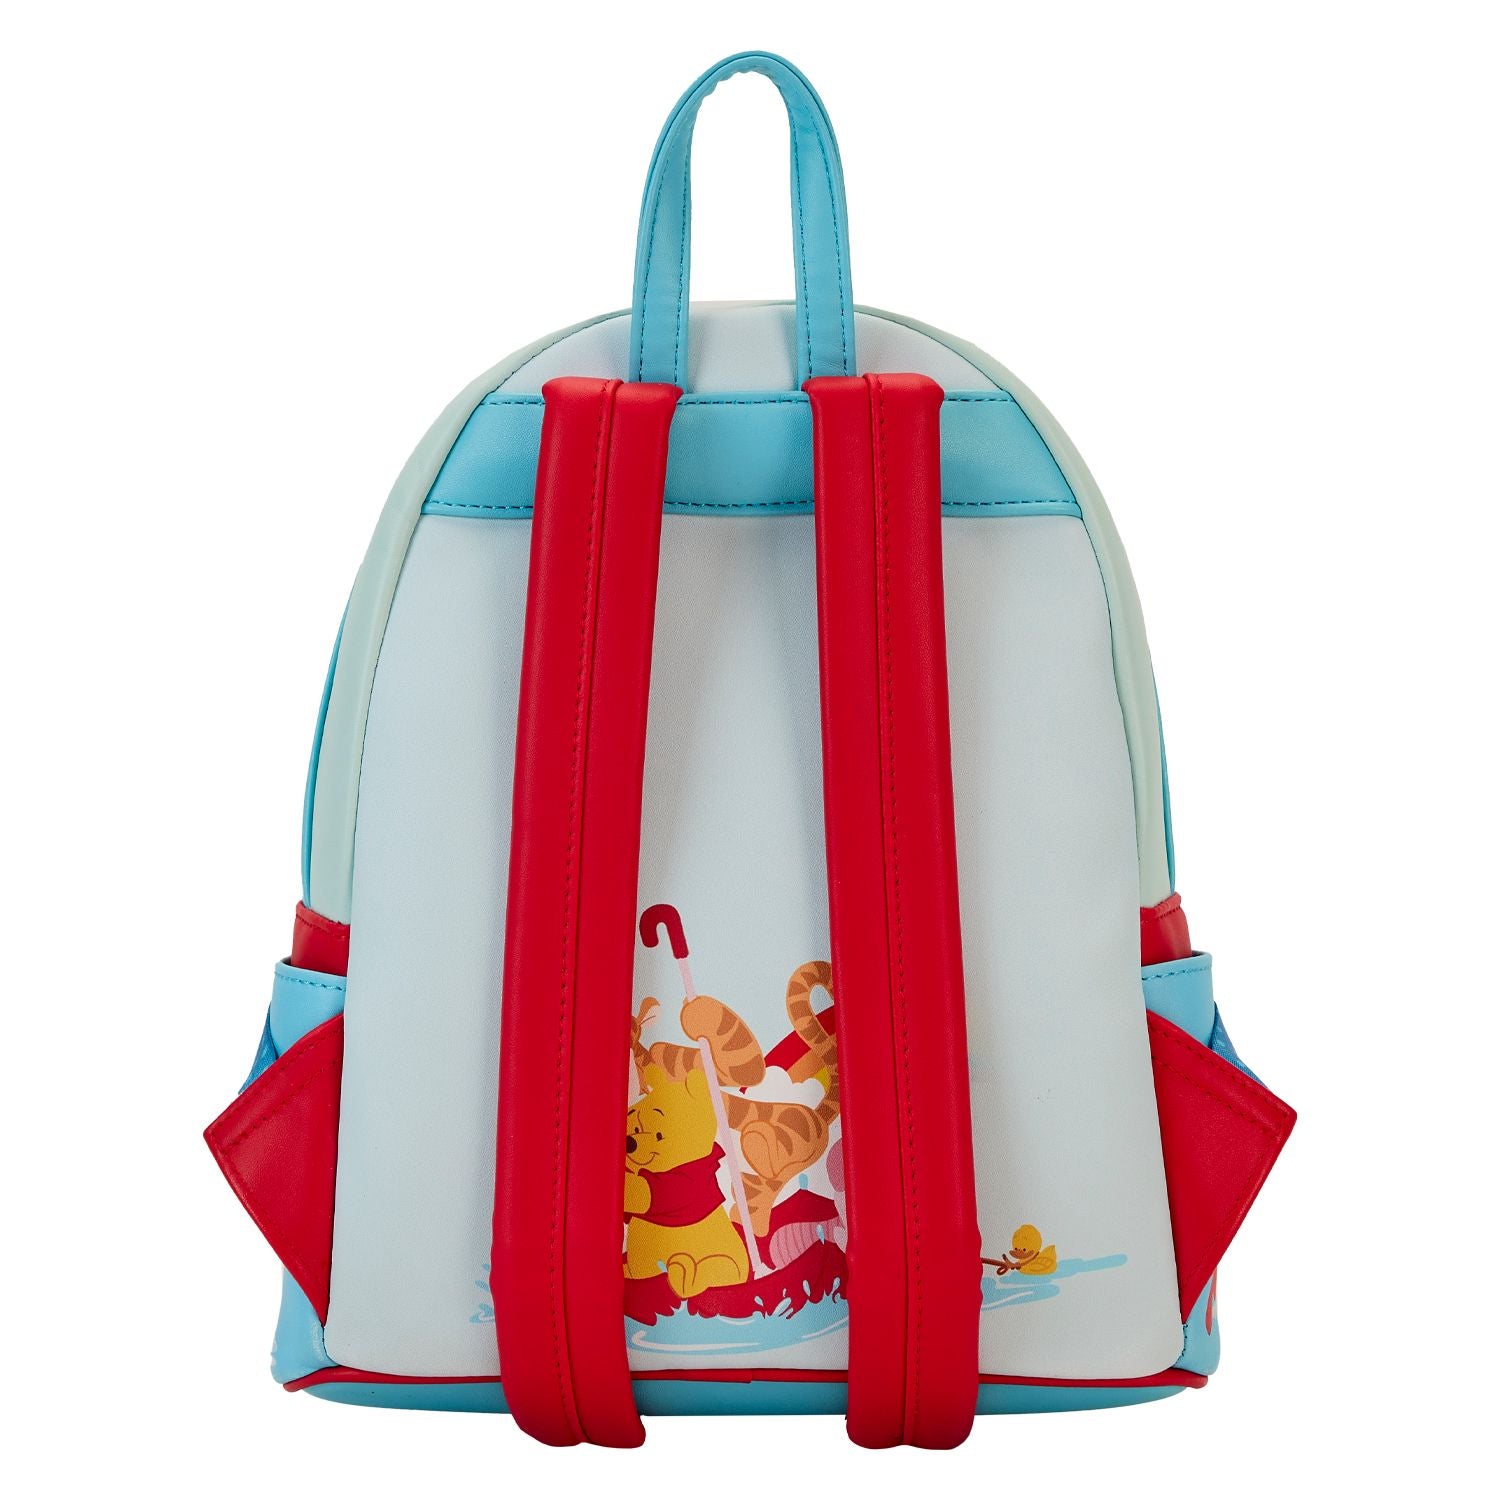 Loungefly DISNEY WINNIE THE POOH AND FRIENDS RAINY DAY MINI BACKPACK